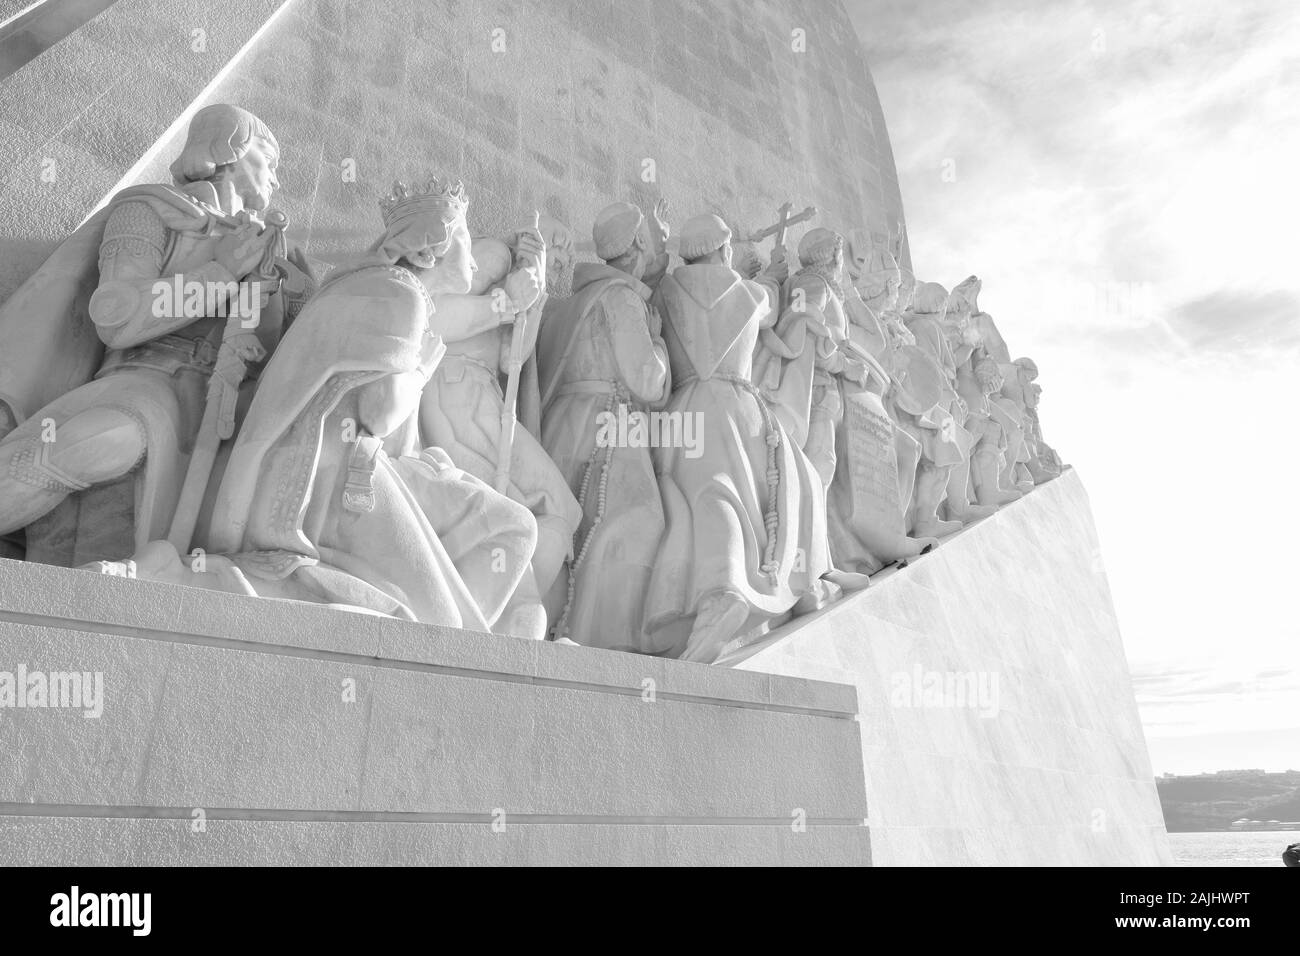 Monument to the Discoveries of the New World, Henry the Navigator, Discovery, History, Exploring, Stone Sculpture, Figures, Stone, Belem, Portugal. Stock Photo